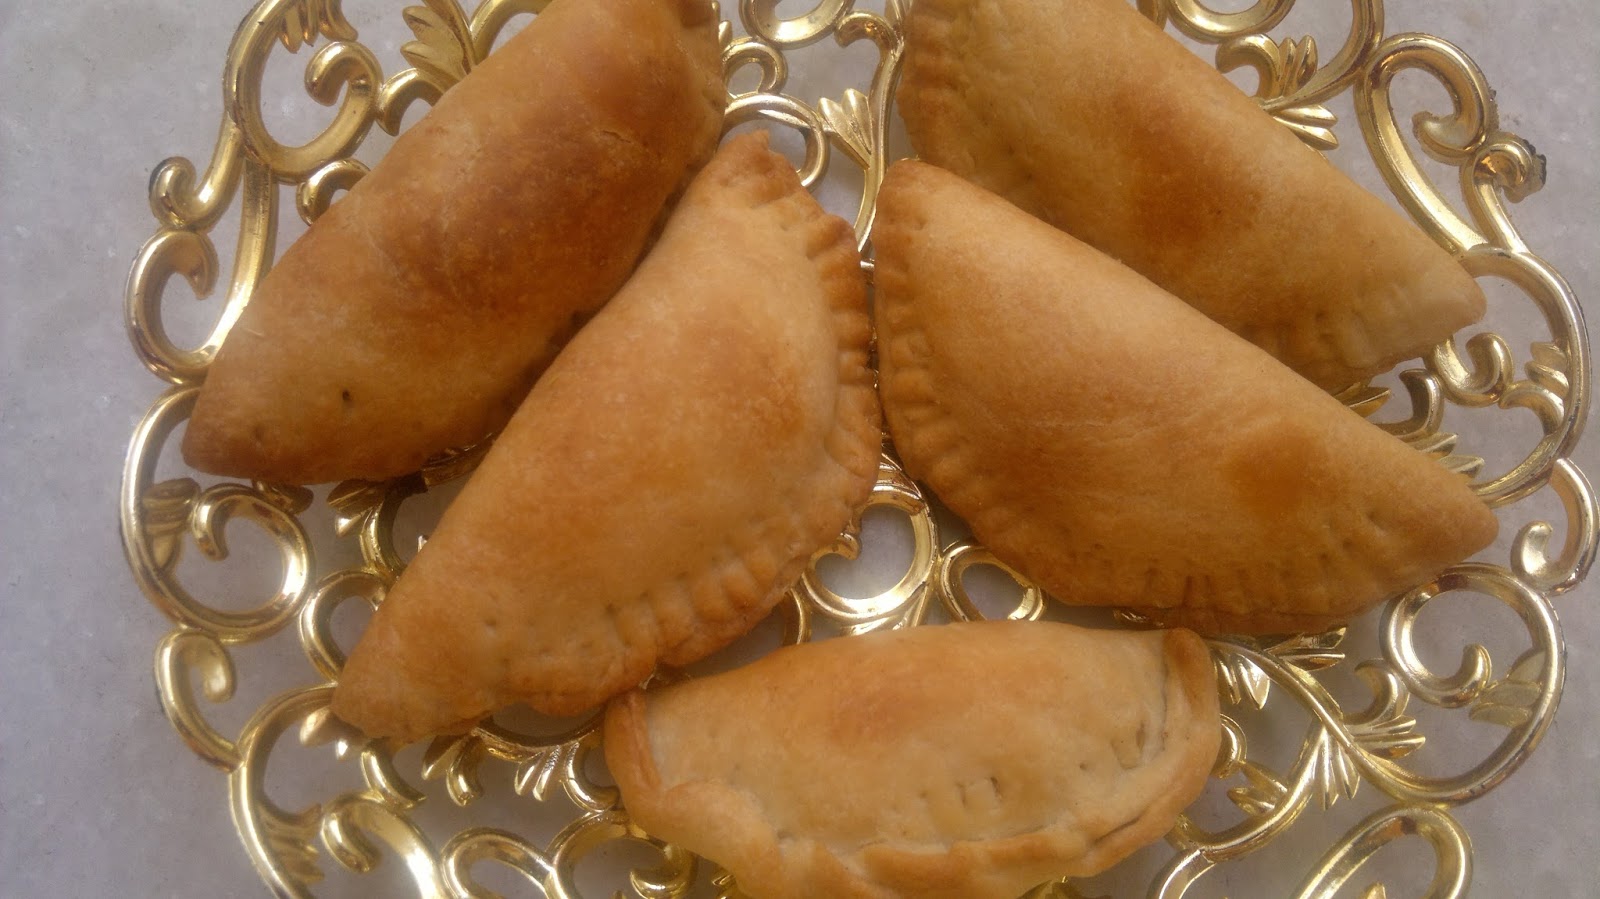 6 Healthy Gujiyas to Experiment with on Holi. | #Holi,Recipes,Cooking  Tips,Snacks and sweets,Festivals,Party Ideas,Healthy recipes,Food,#Useful |  Blog Post by Leena Chadha | Momspresso